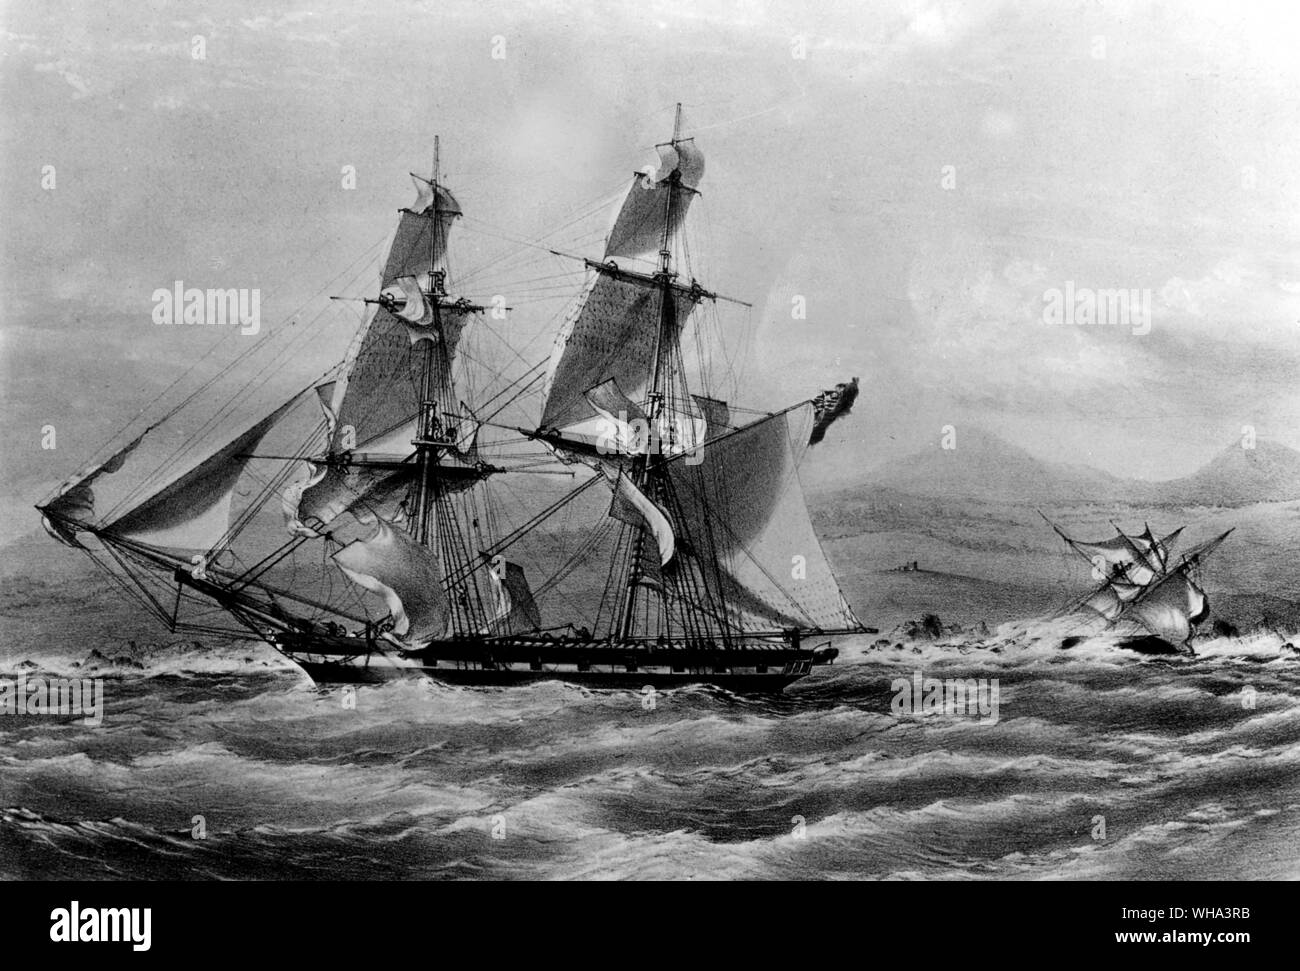 A mid-19th century British sloop by H J Vernon. Stock Photo